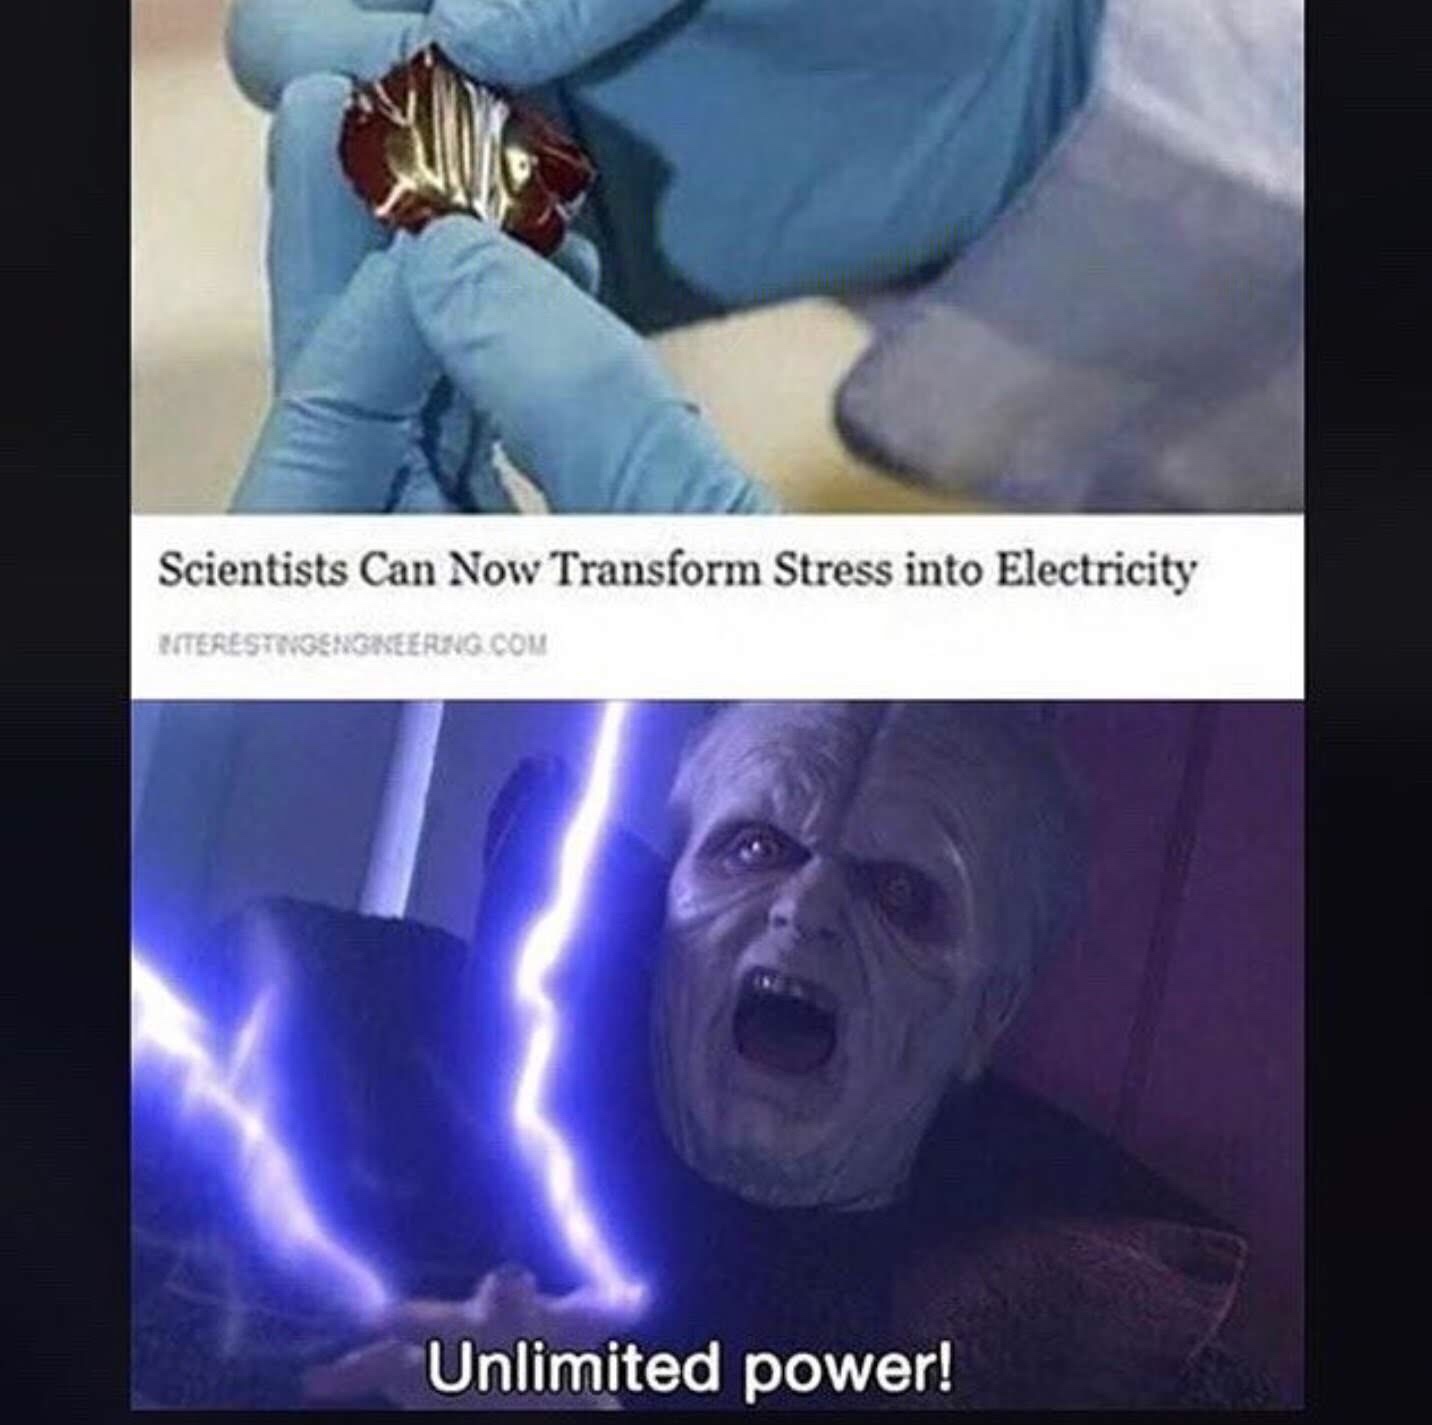 meme about turning your stress into electricity